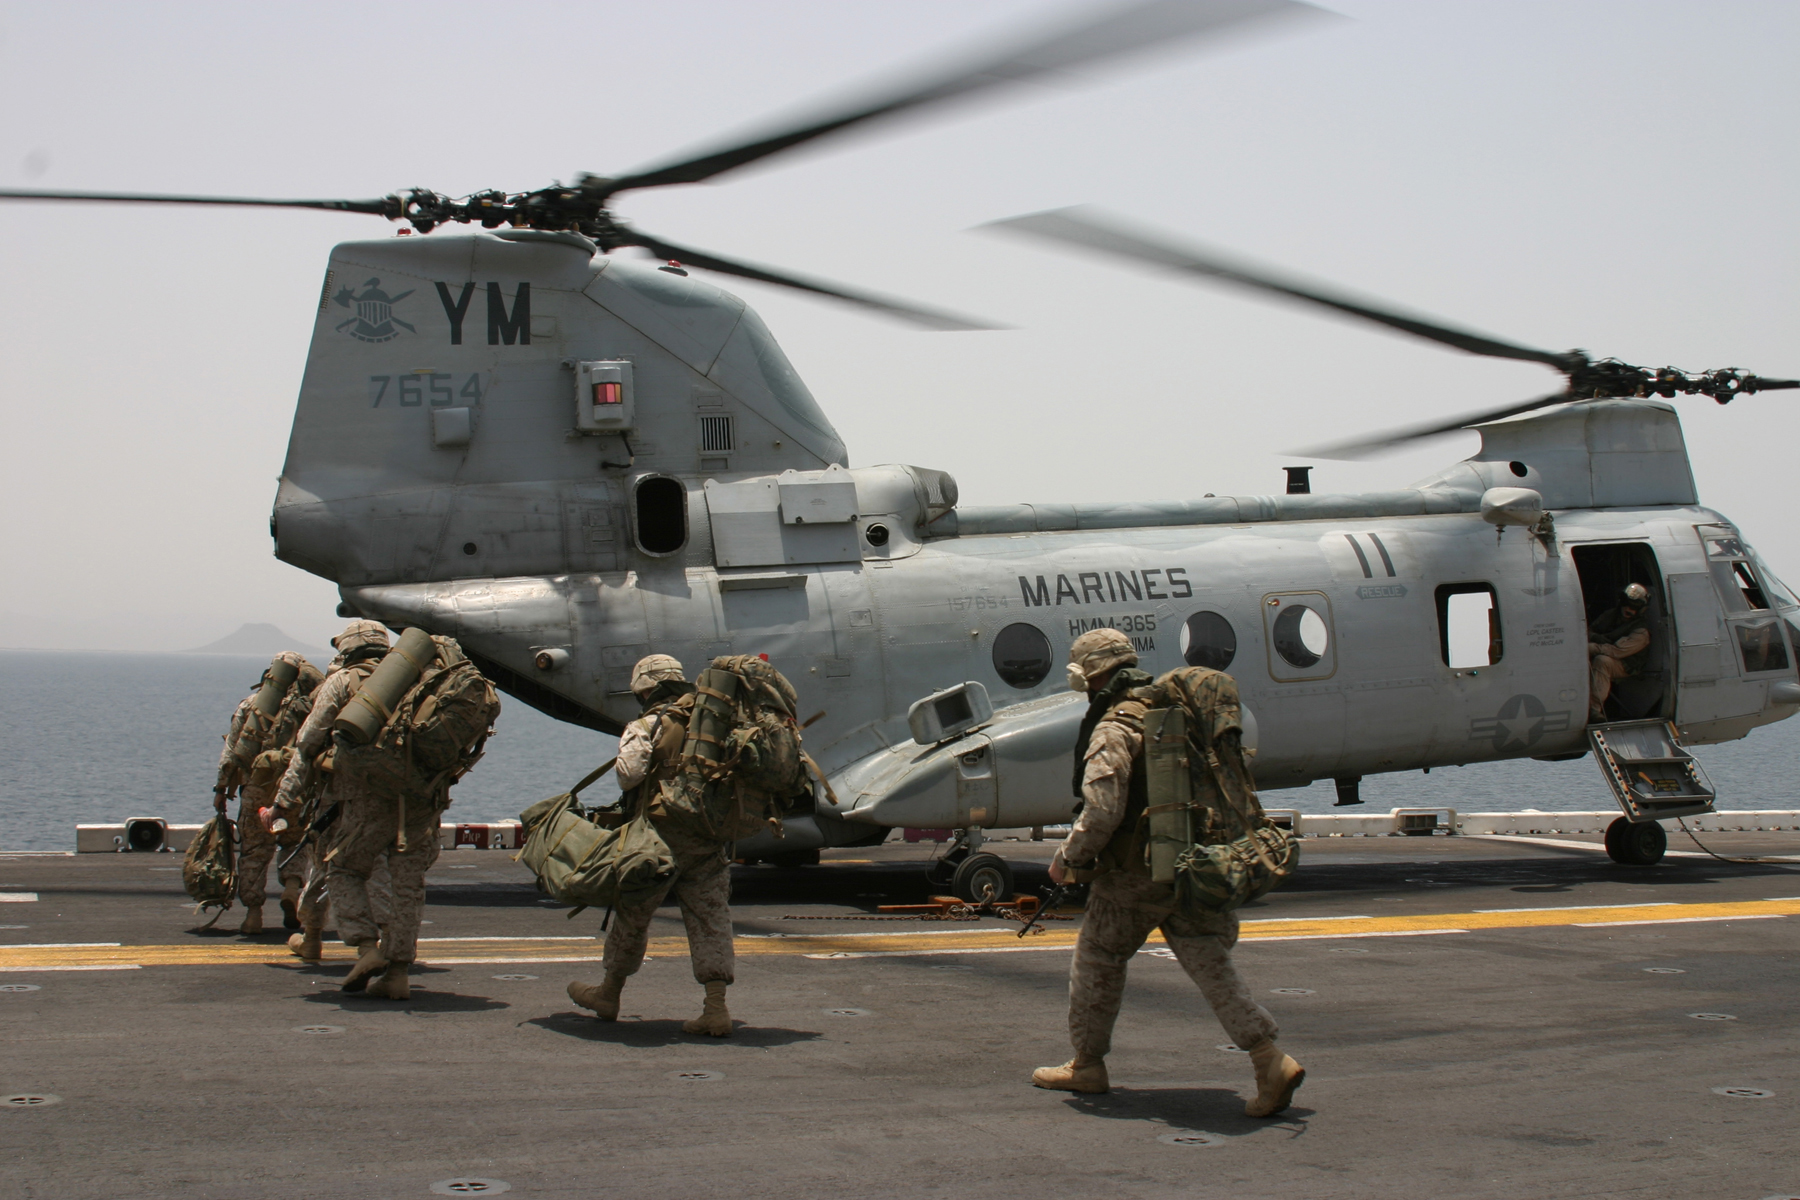 Marines_CH-46_Helicopter.jpg